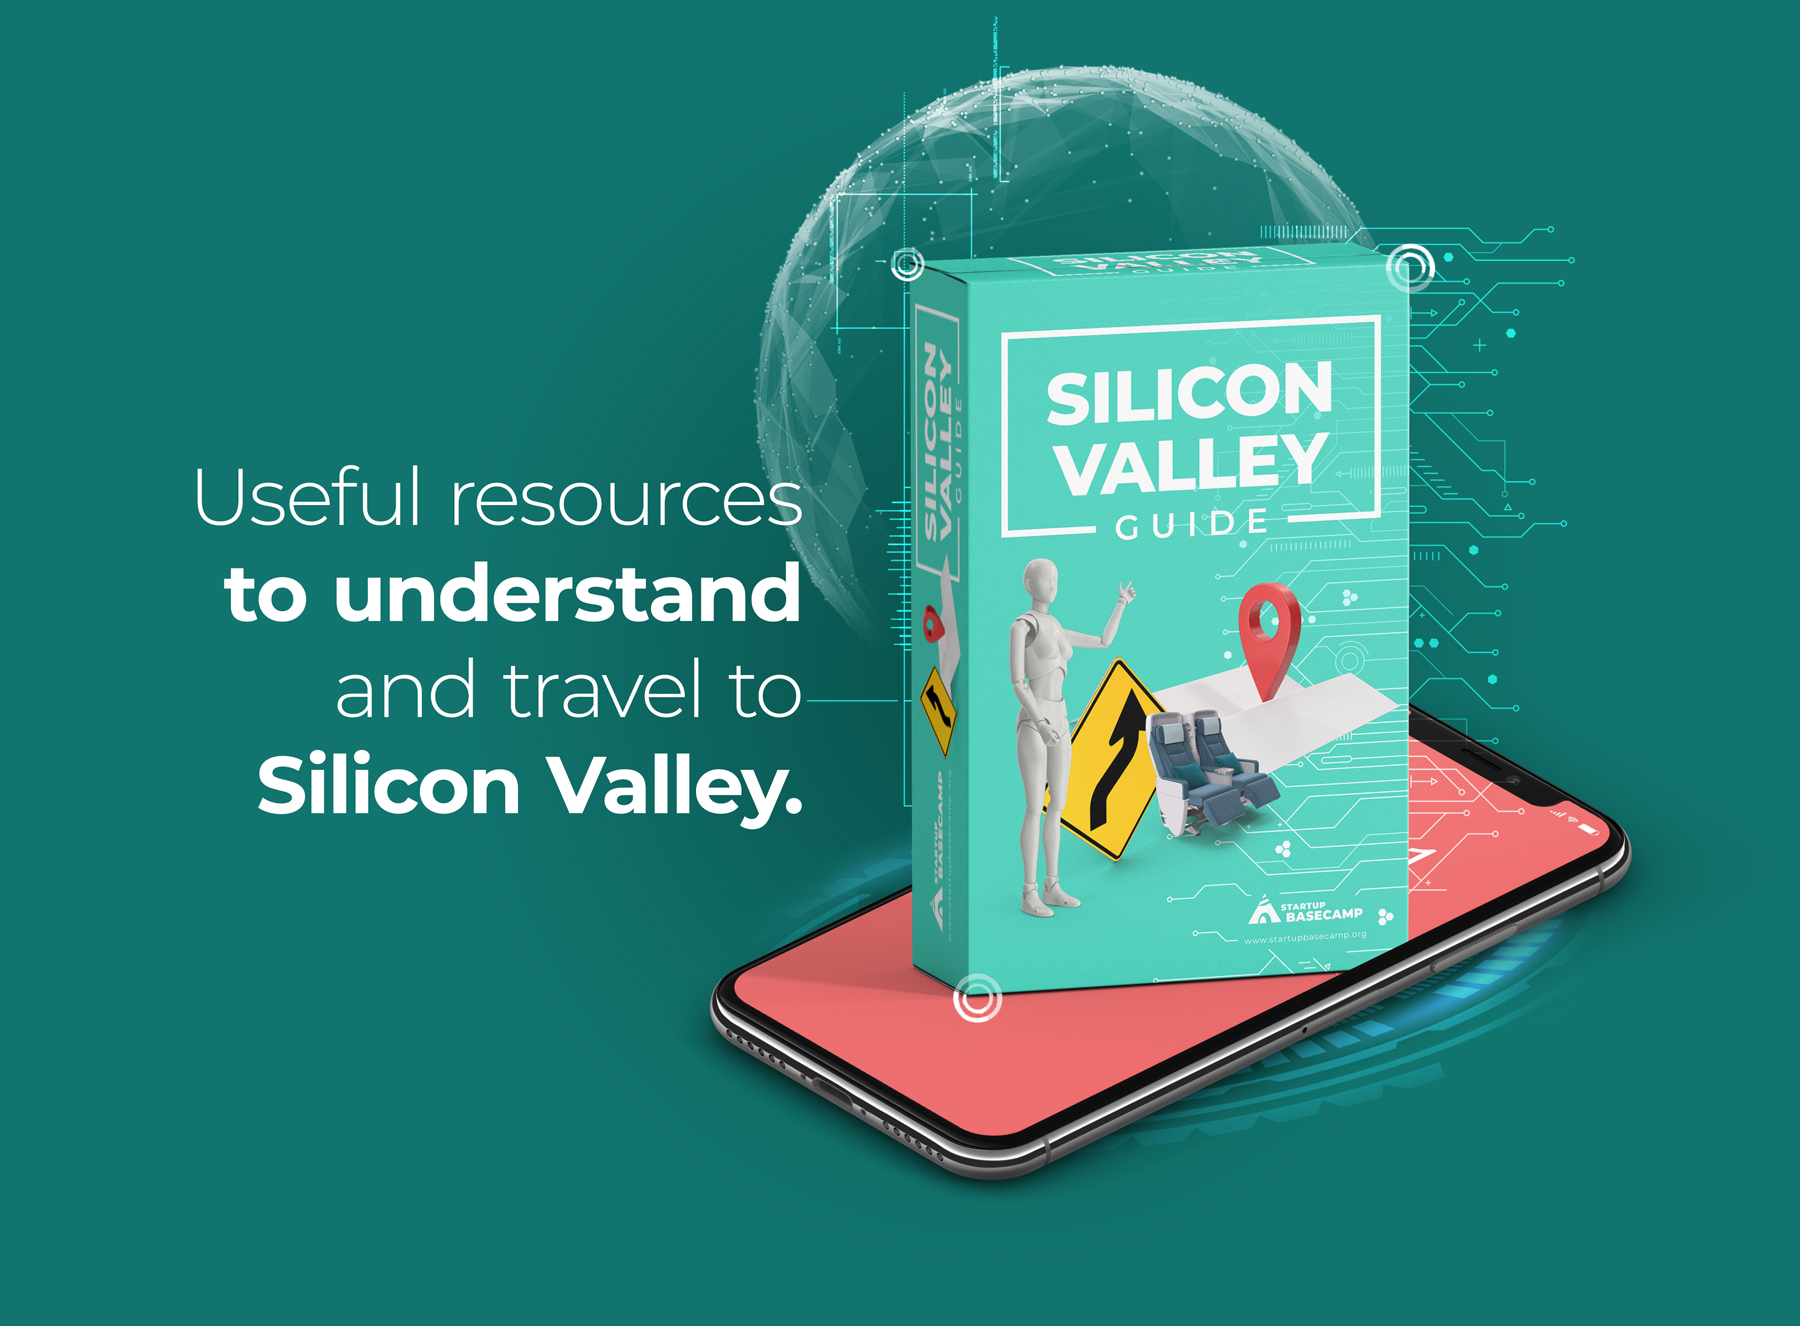 Silicon Valley Guide